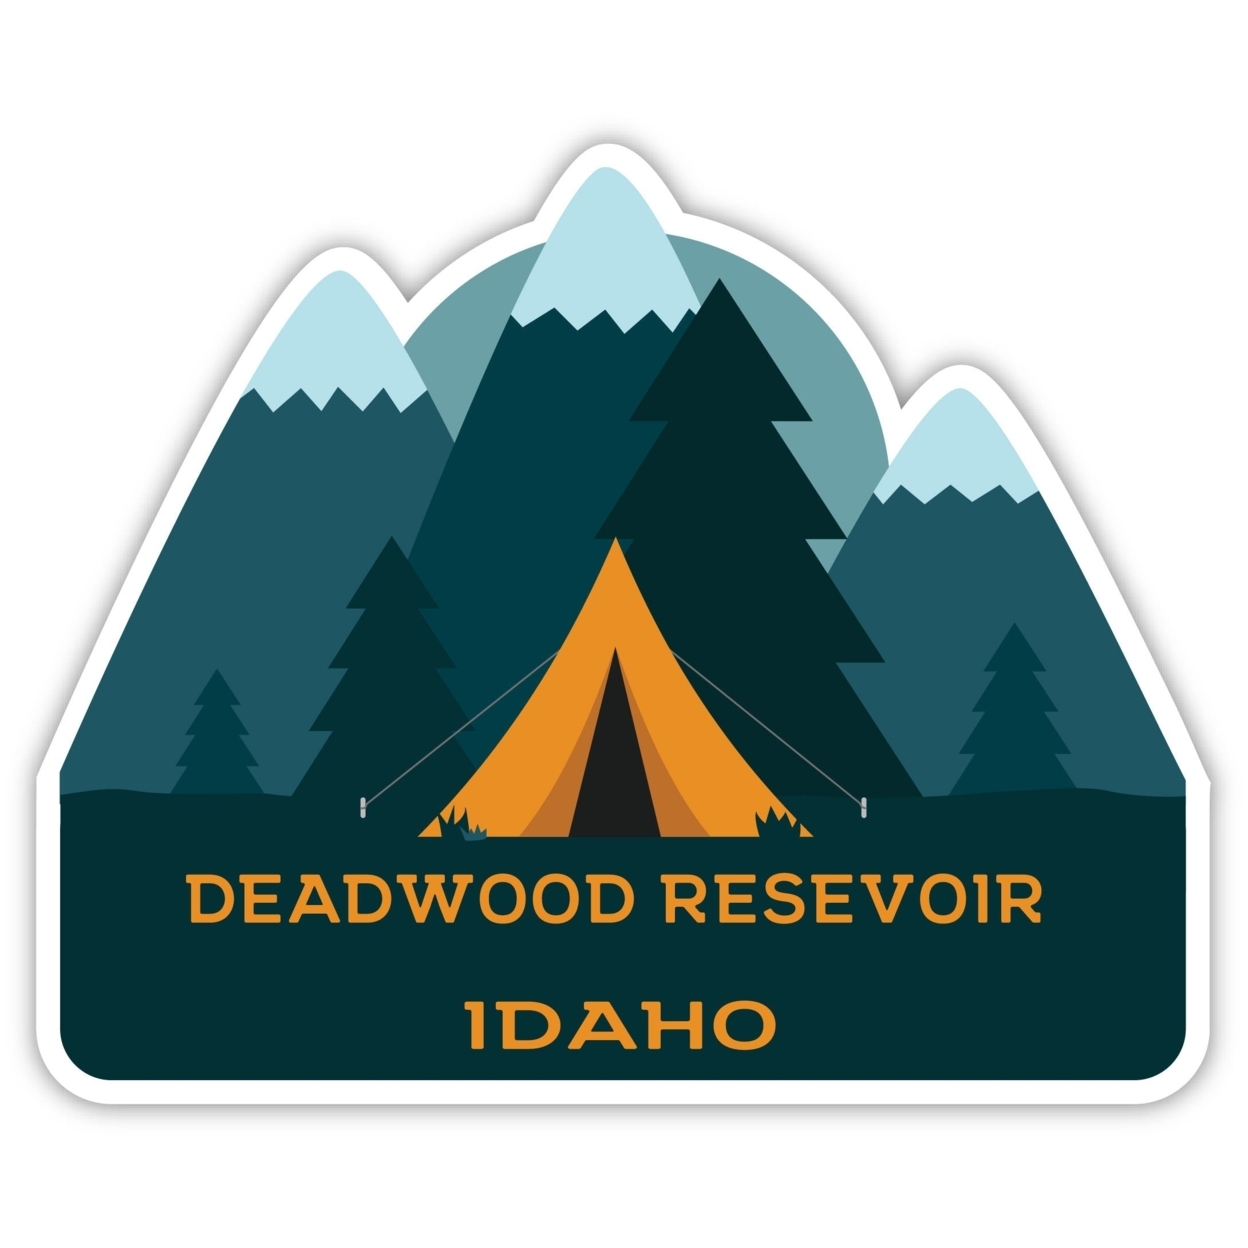 Deadwood Resevoir Idaho Souvenir Decorative Stickers (Choose Theme And Size) - 4-Pack, 6-Inch, Tent